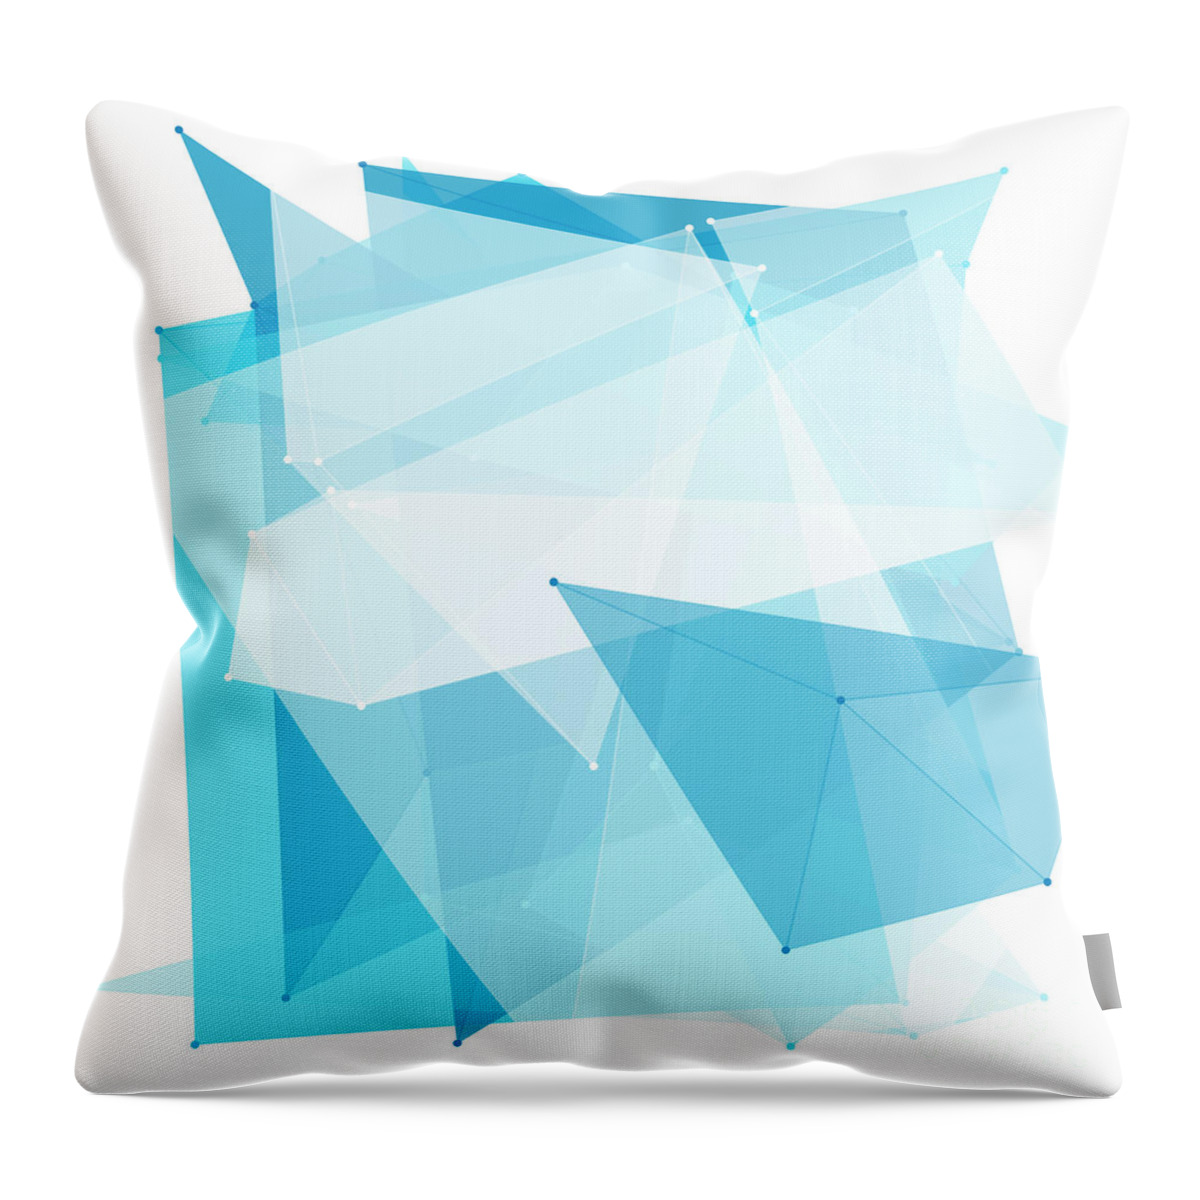 Abstract Throw Pillow featuring the digital art Blue Sky Polygon Pattern by Frank Ramspott